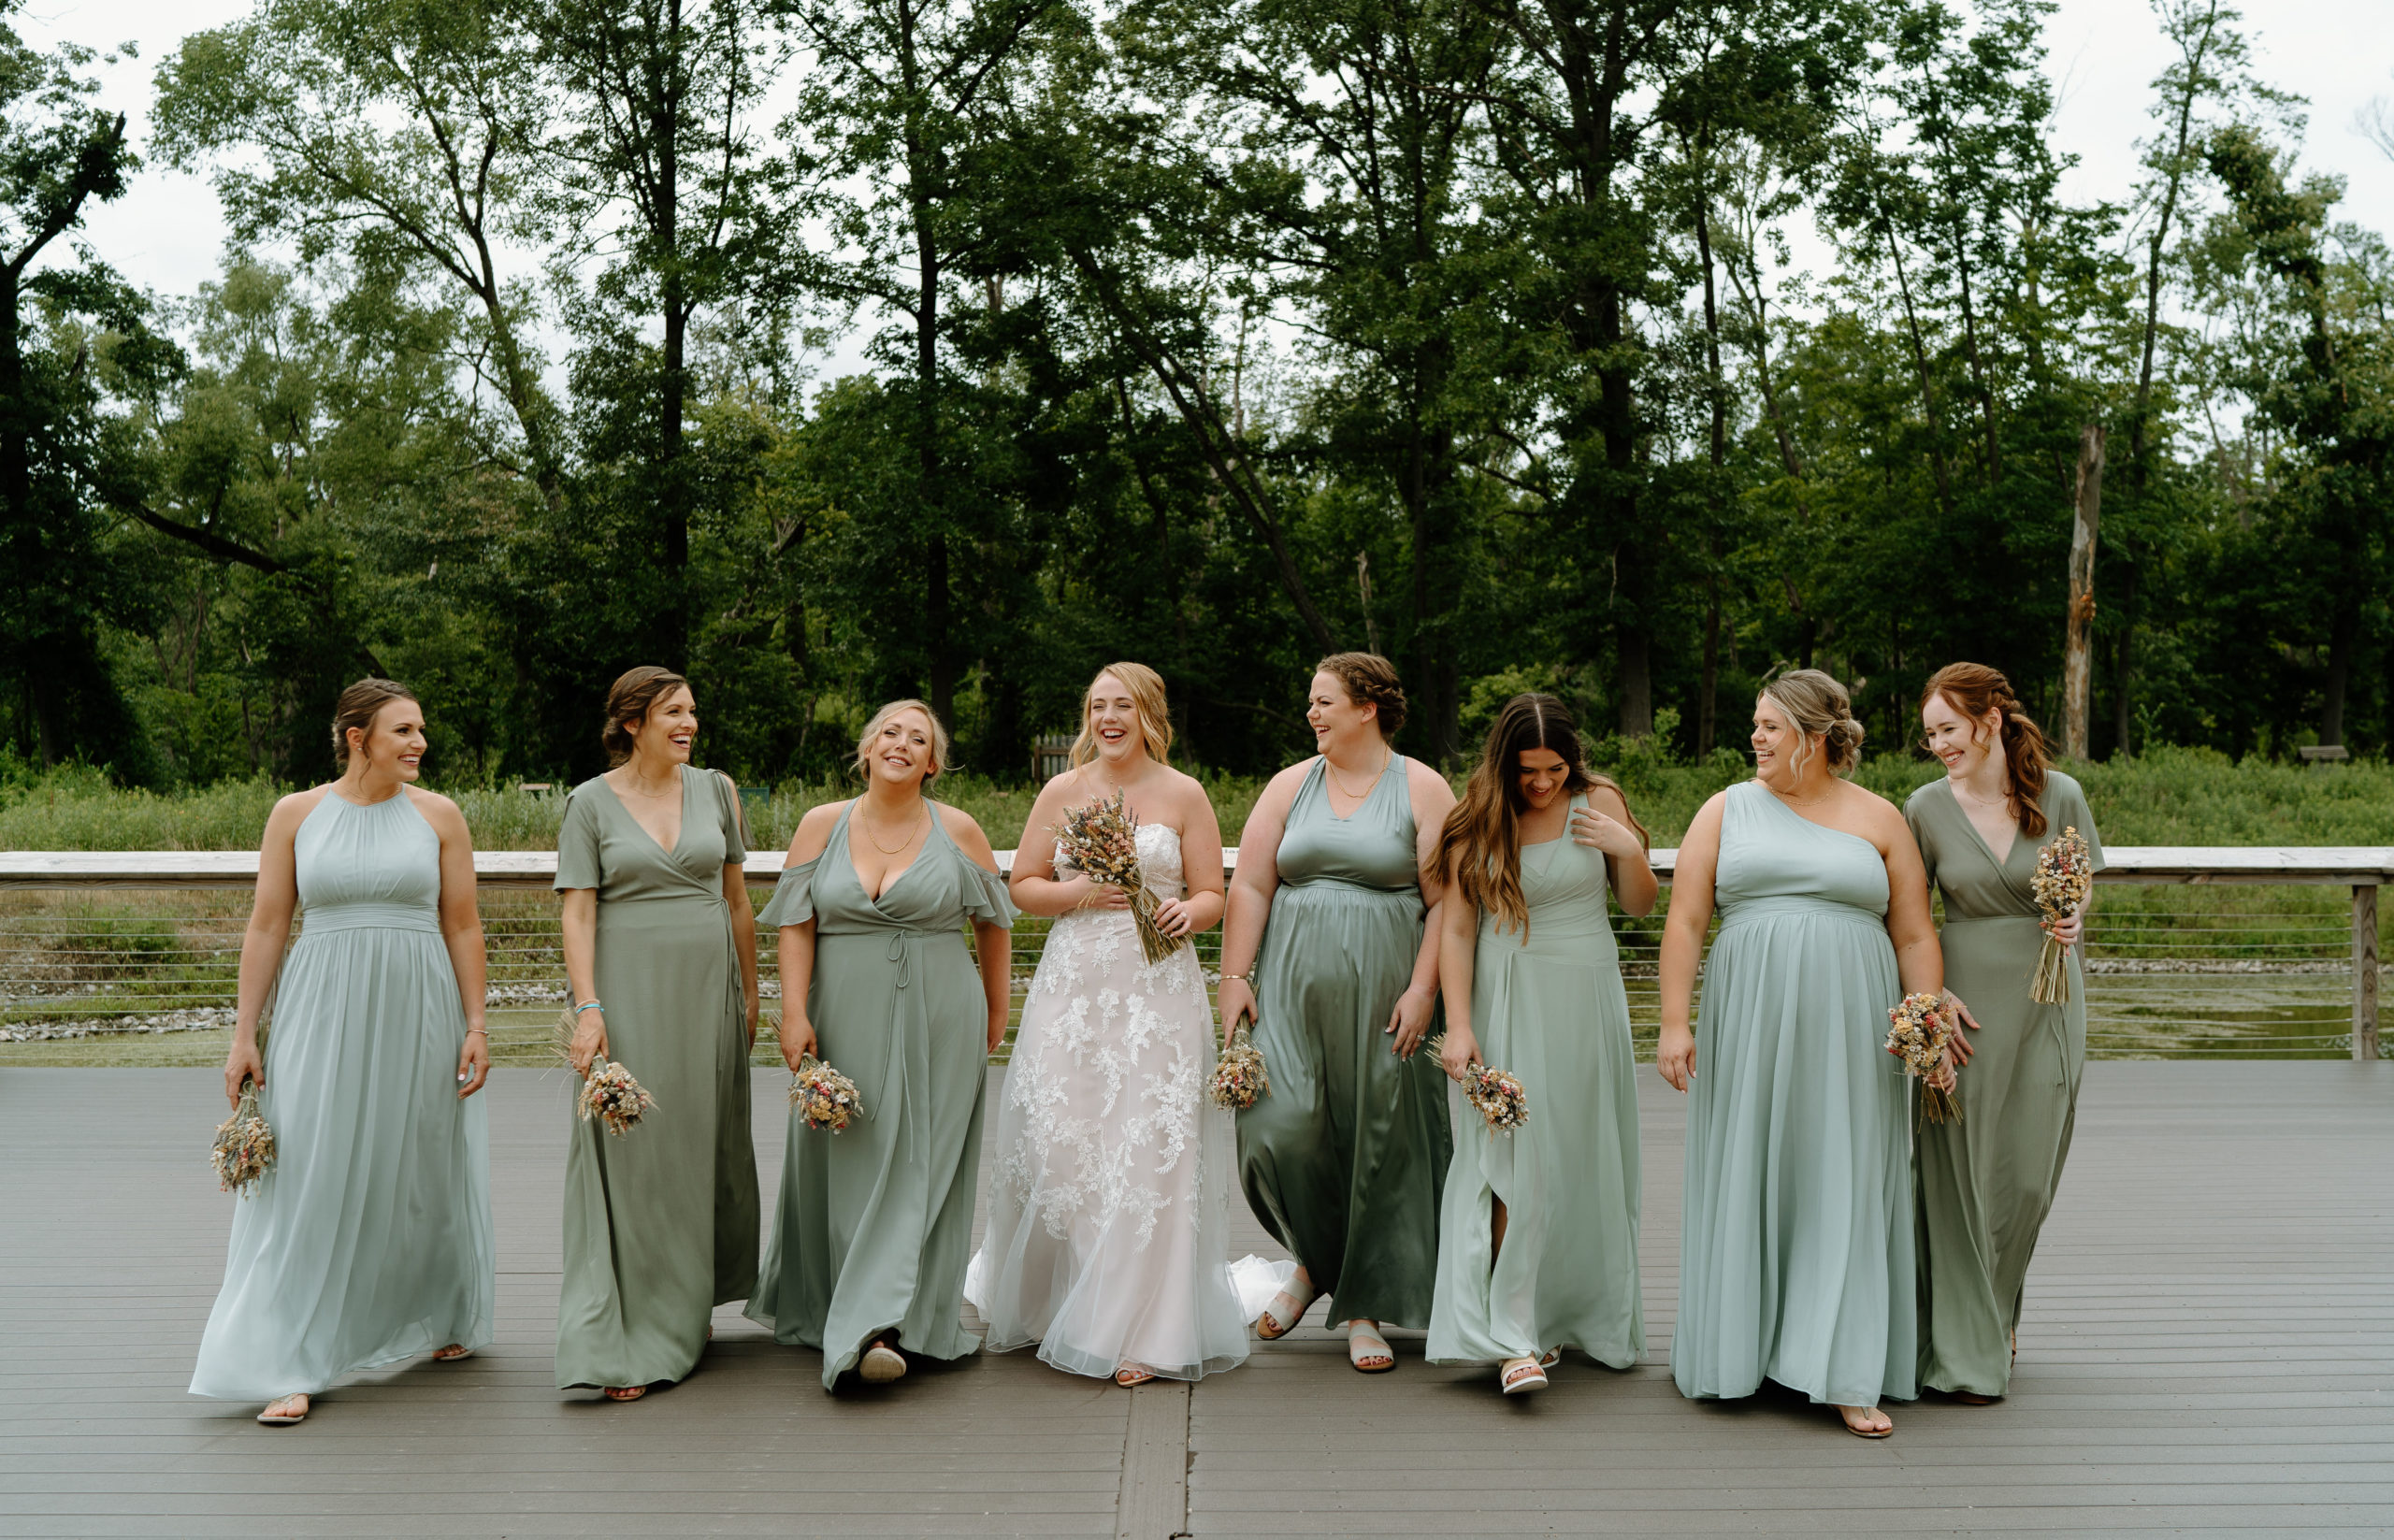 This is a group of bridesmaids taking a picture with the bride on her wedding day